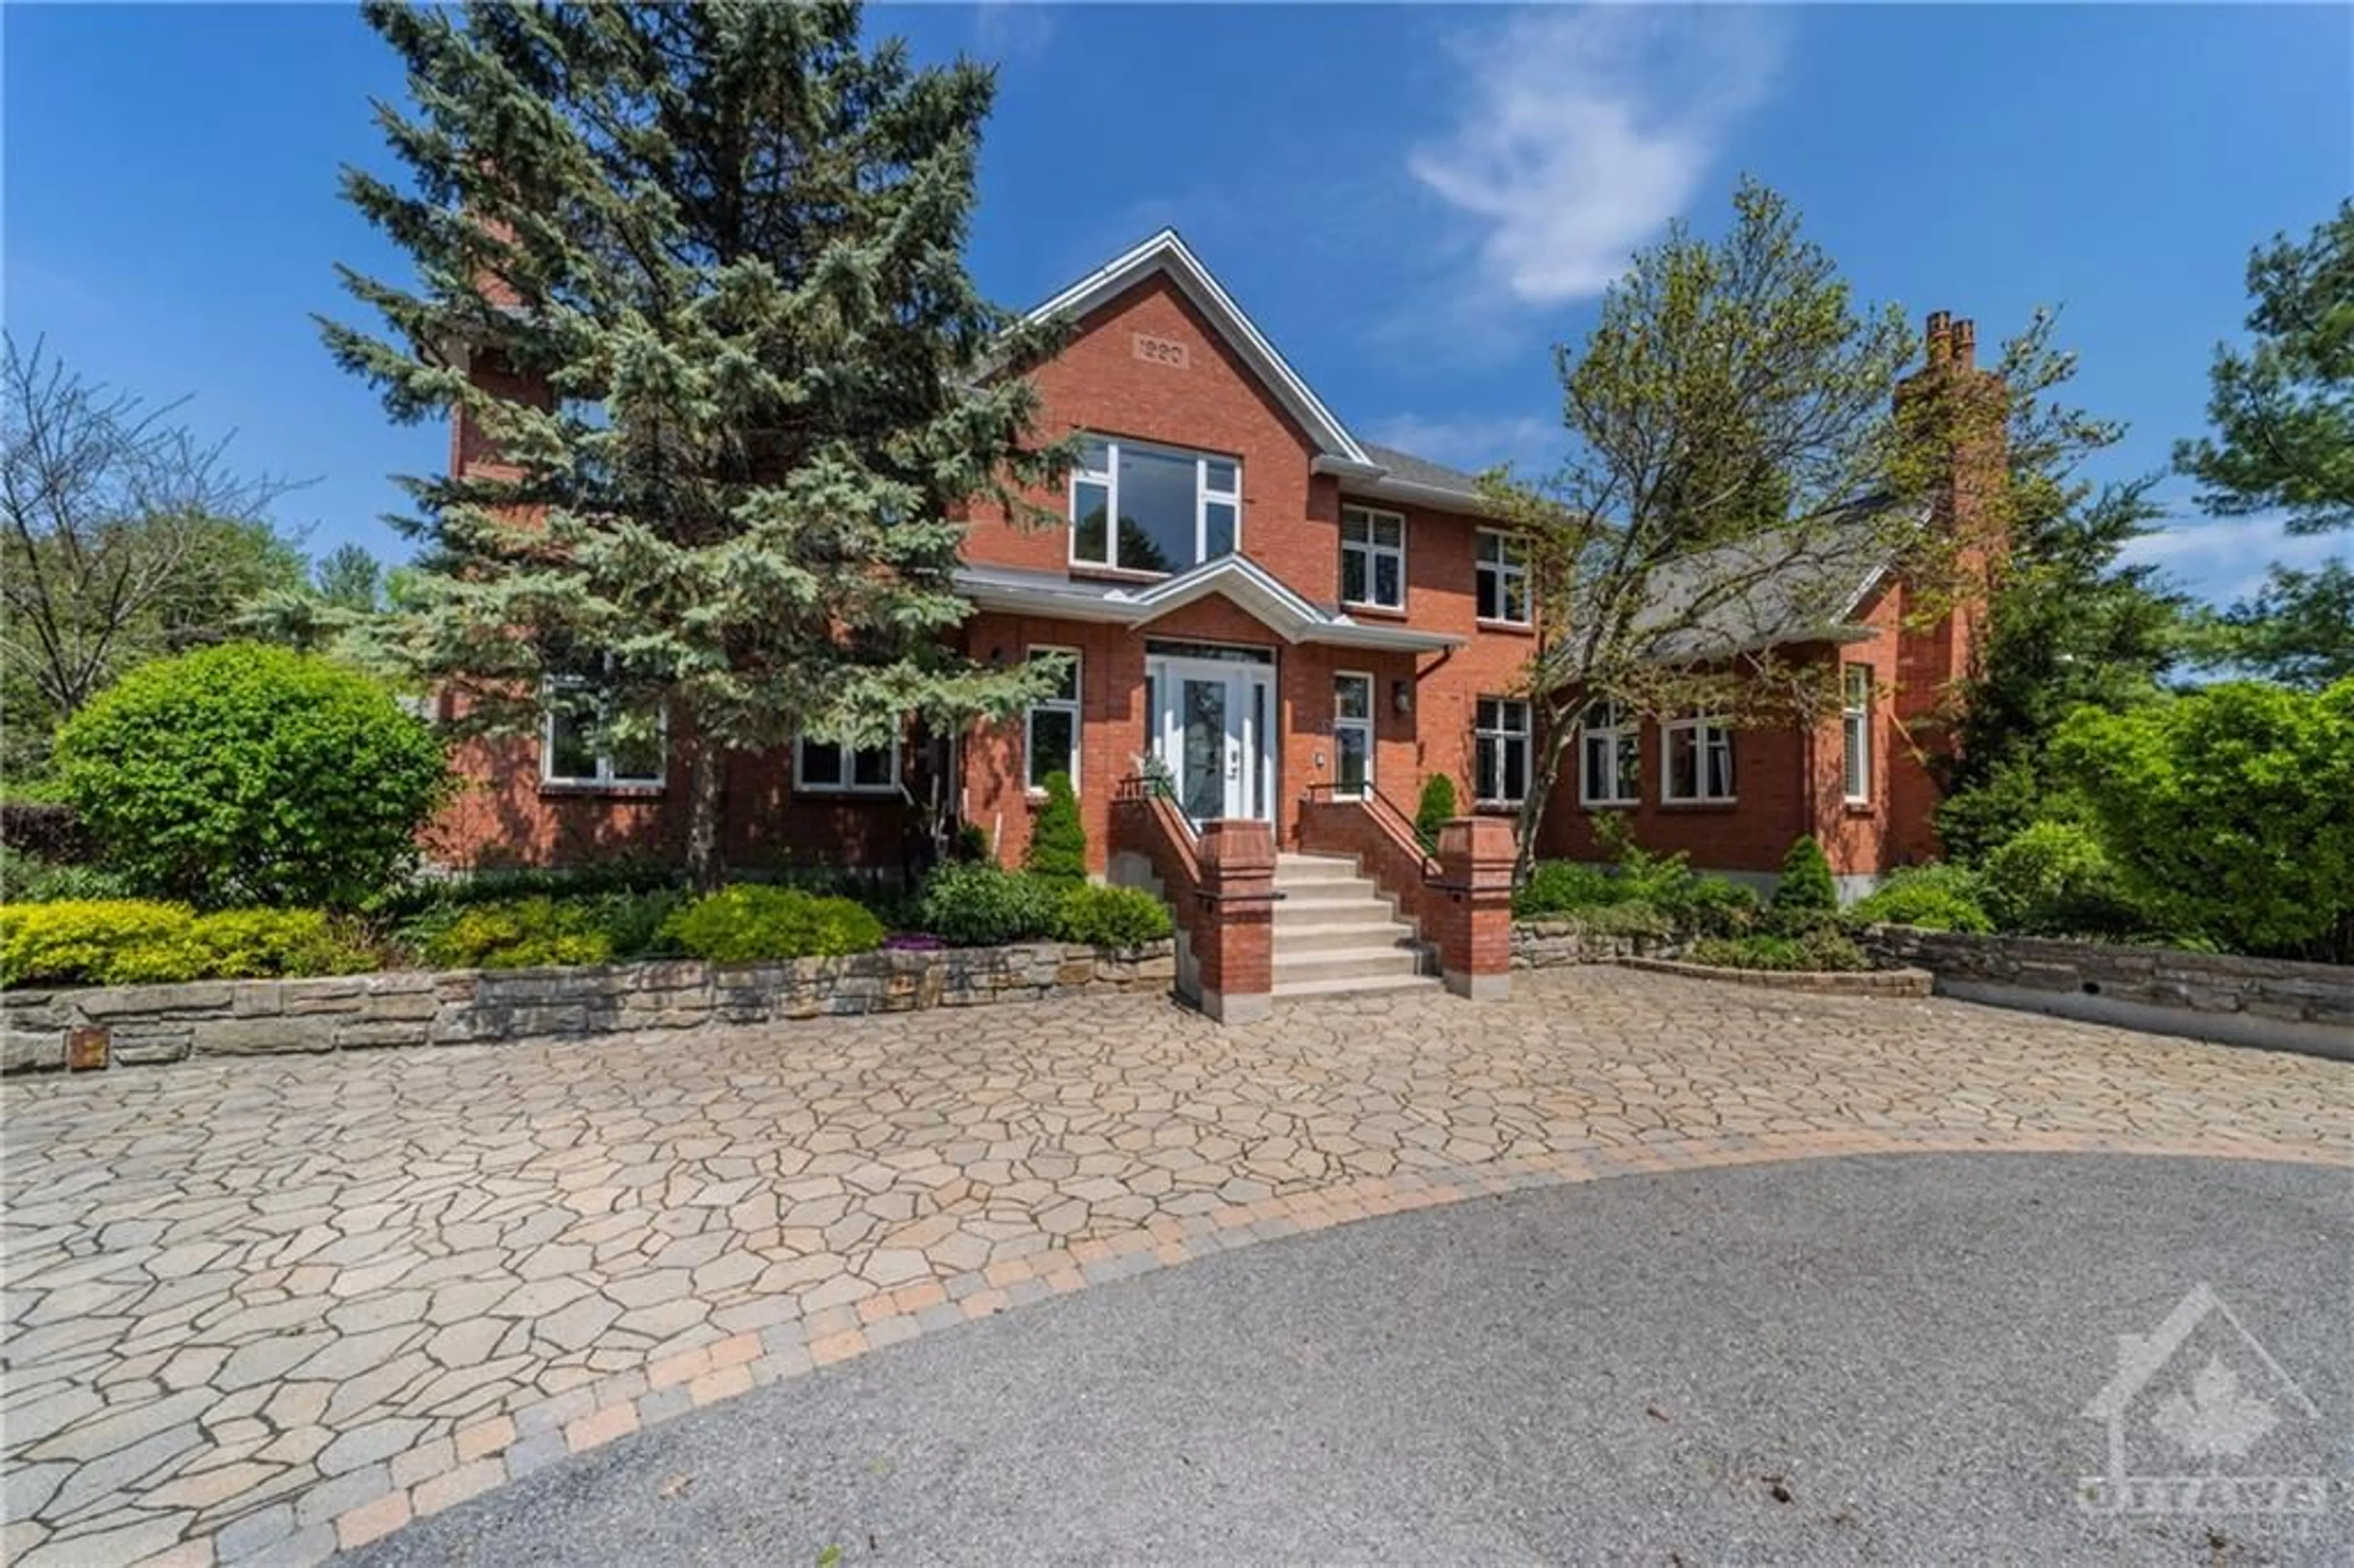 Home with brick exterior material for 18 MARCHBROOK Cir, Ottawa Ontario K2W 1A1